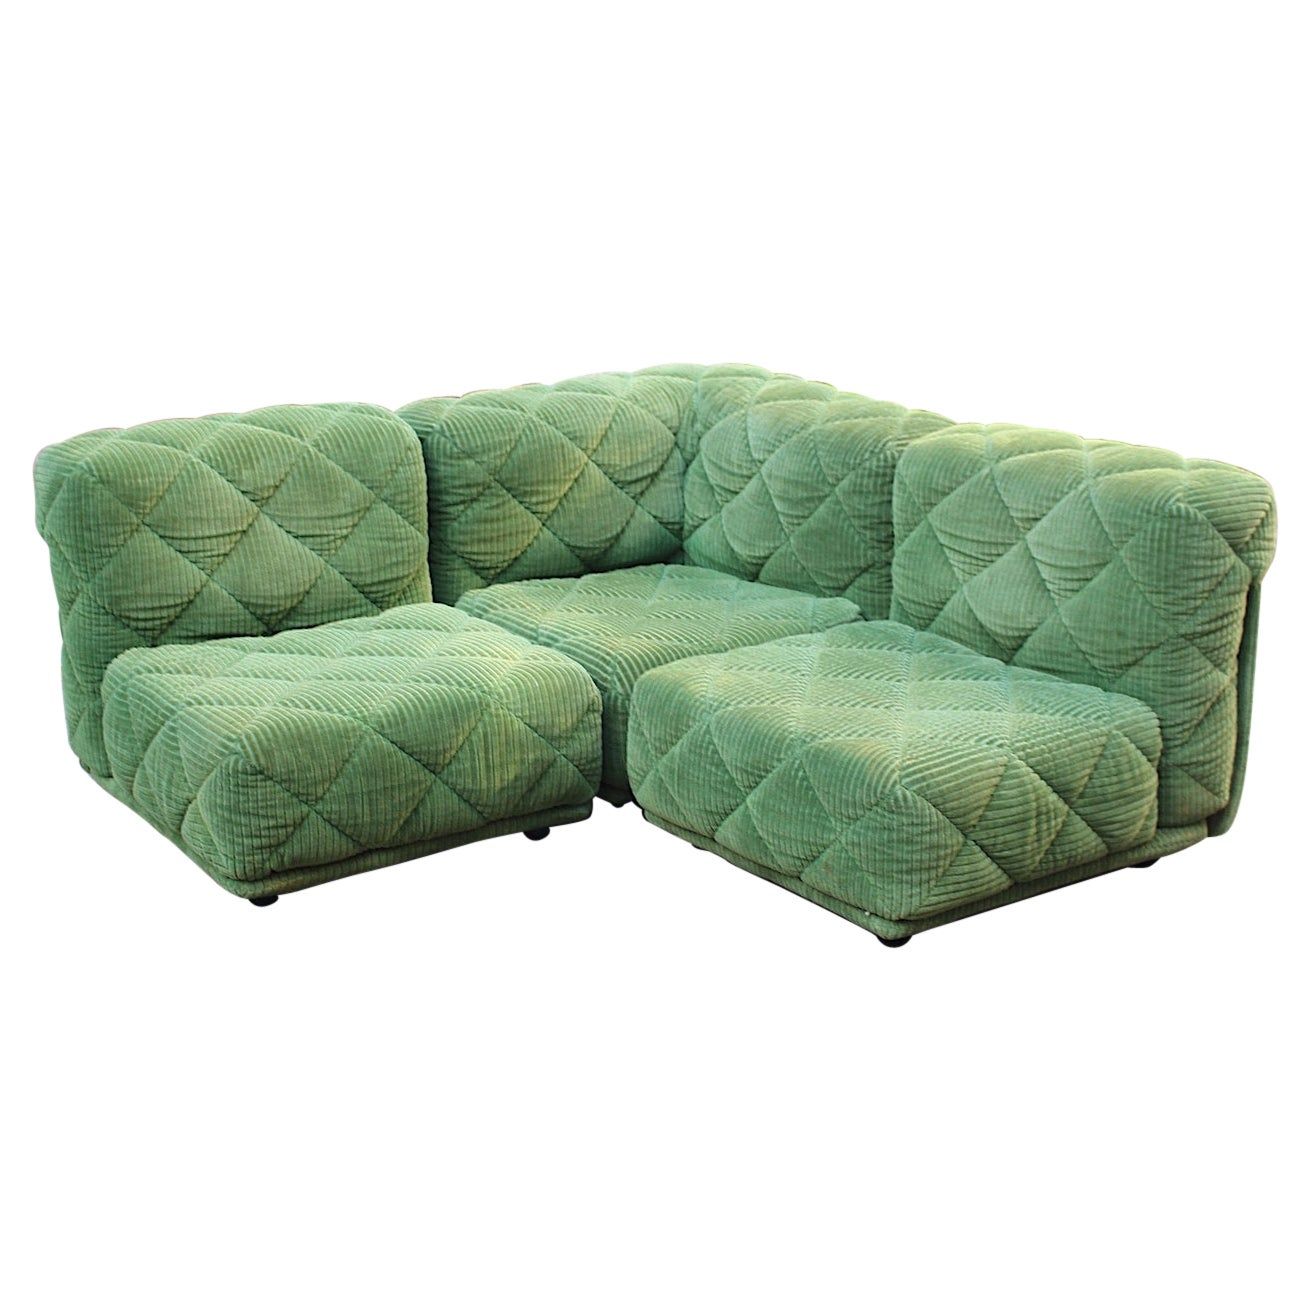 Space Age Vintage Green Velvet Sectional Modular Sofa Wittmann 1970s Inside Green Velvet Modular Sectionals (Gallery 15 of 20)